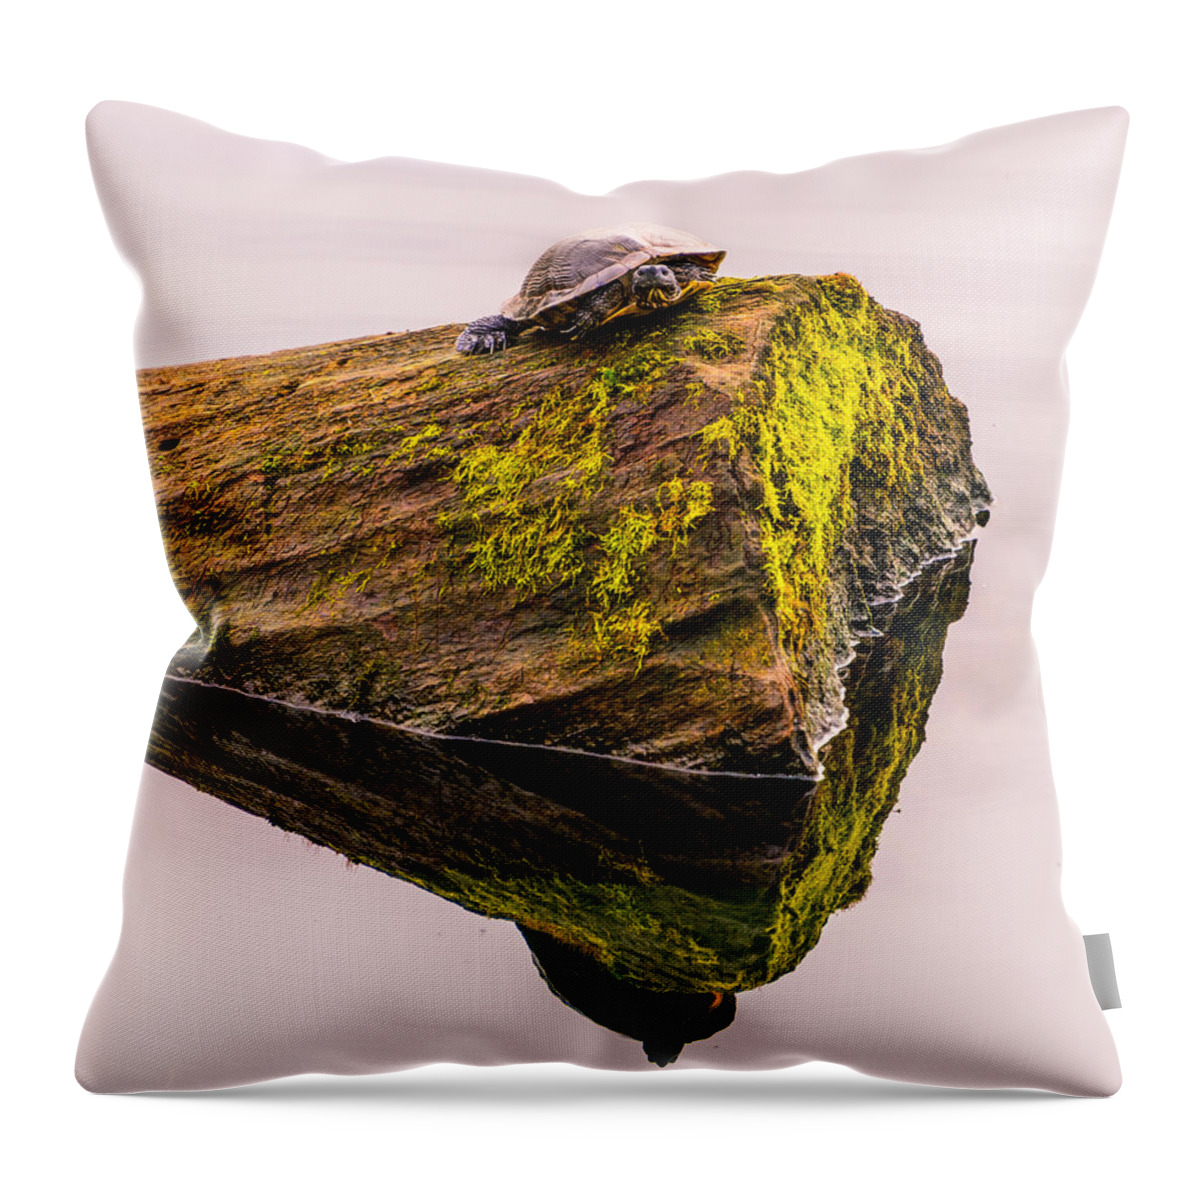 Turtles All The Way Down Throw Pillow featuring the photograph Turtle Basking by Jerry Cahill